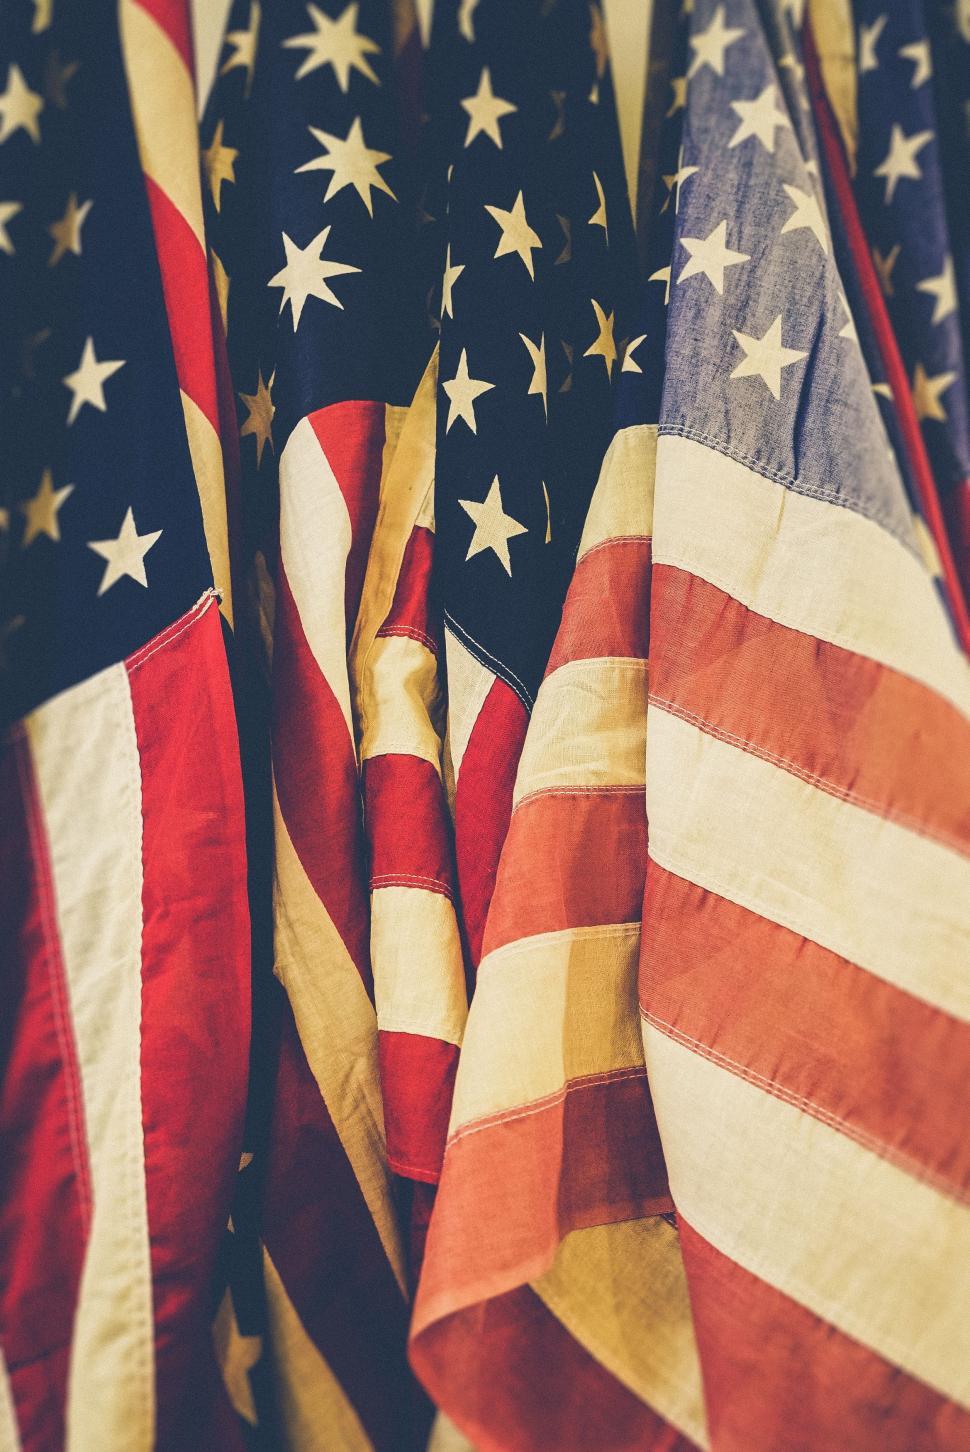 Free Image of American Flags  